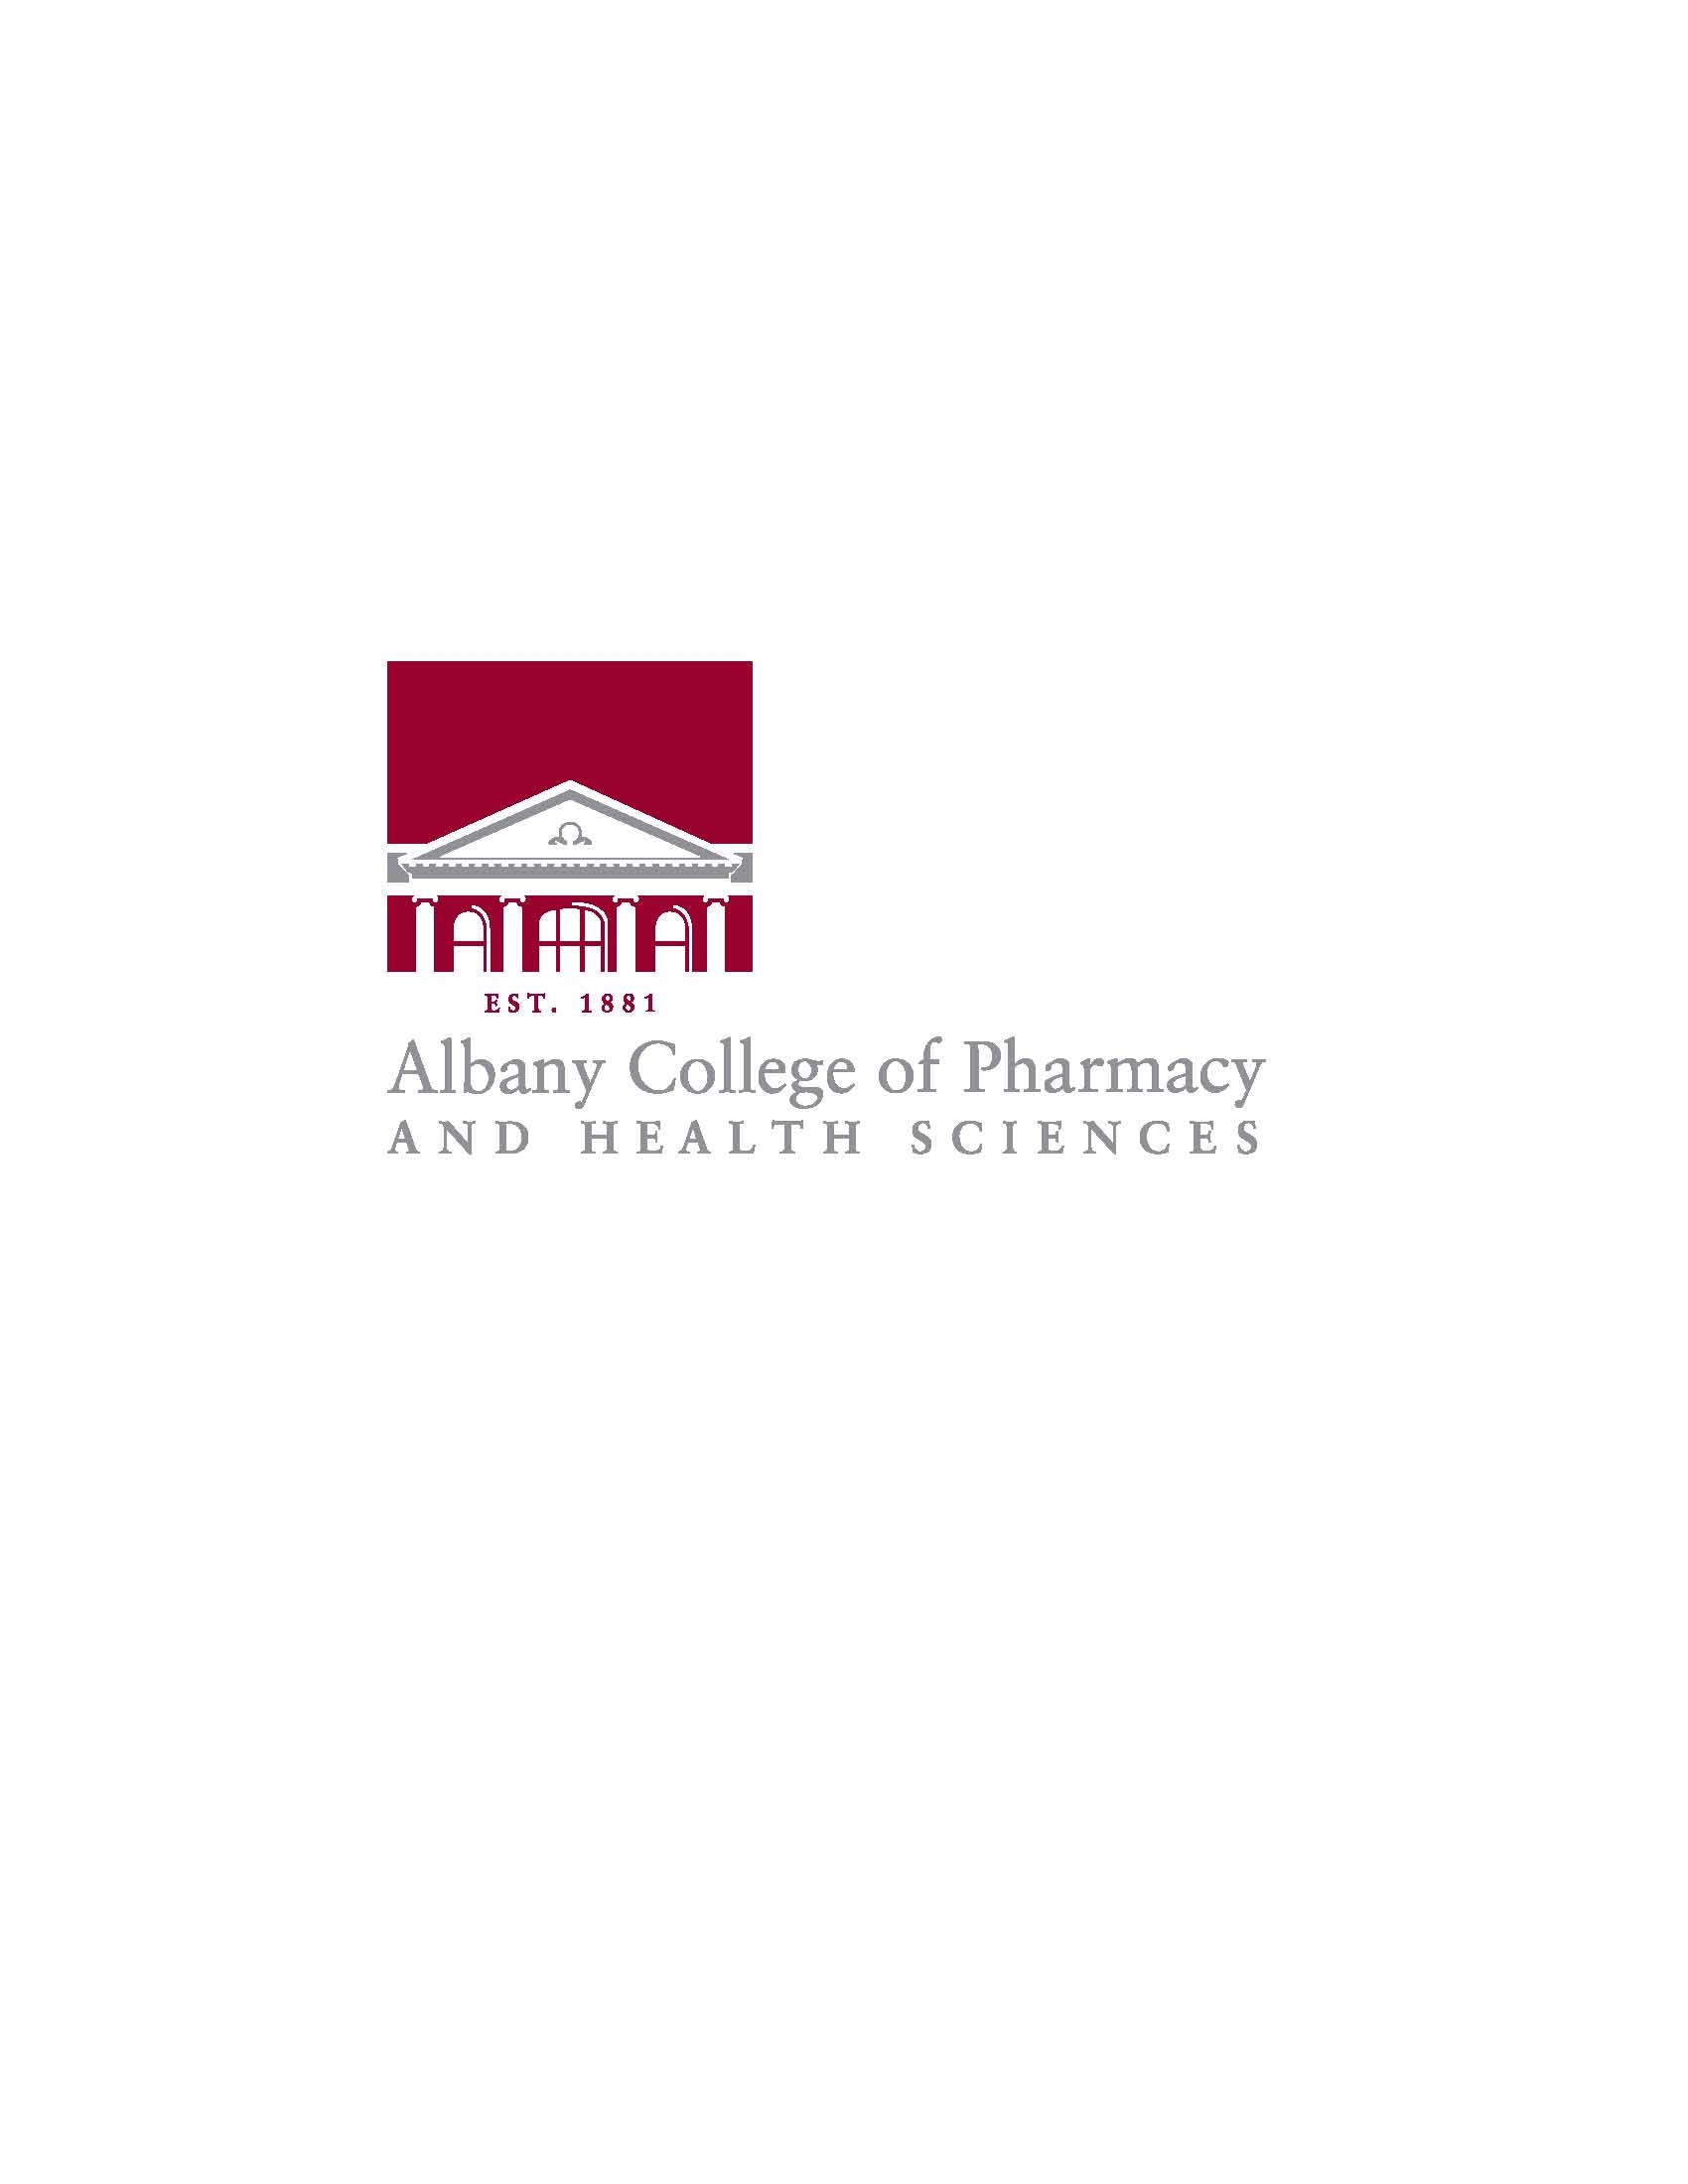 Albany College of Pharmacy and Health Sciences Company Logo